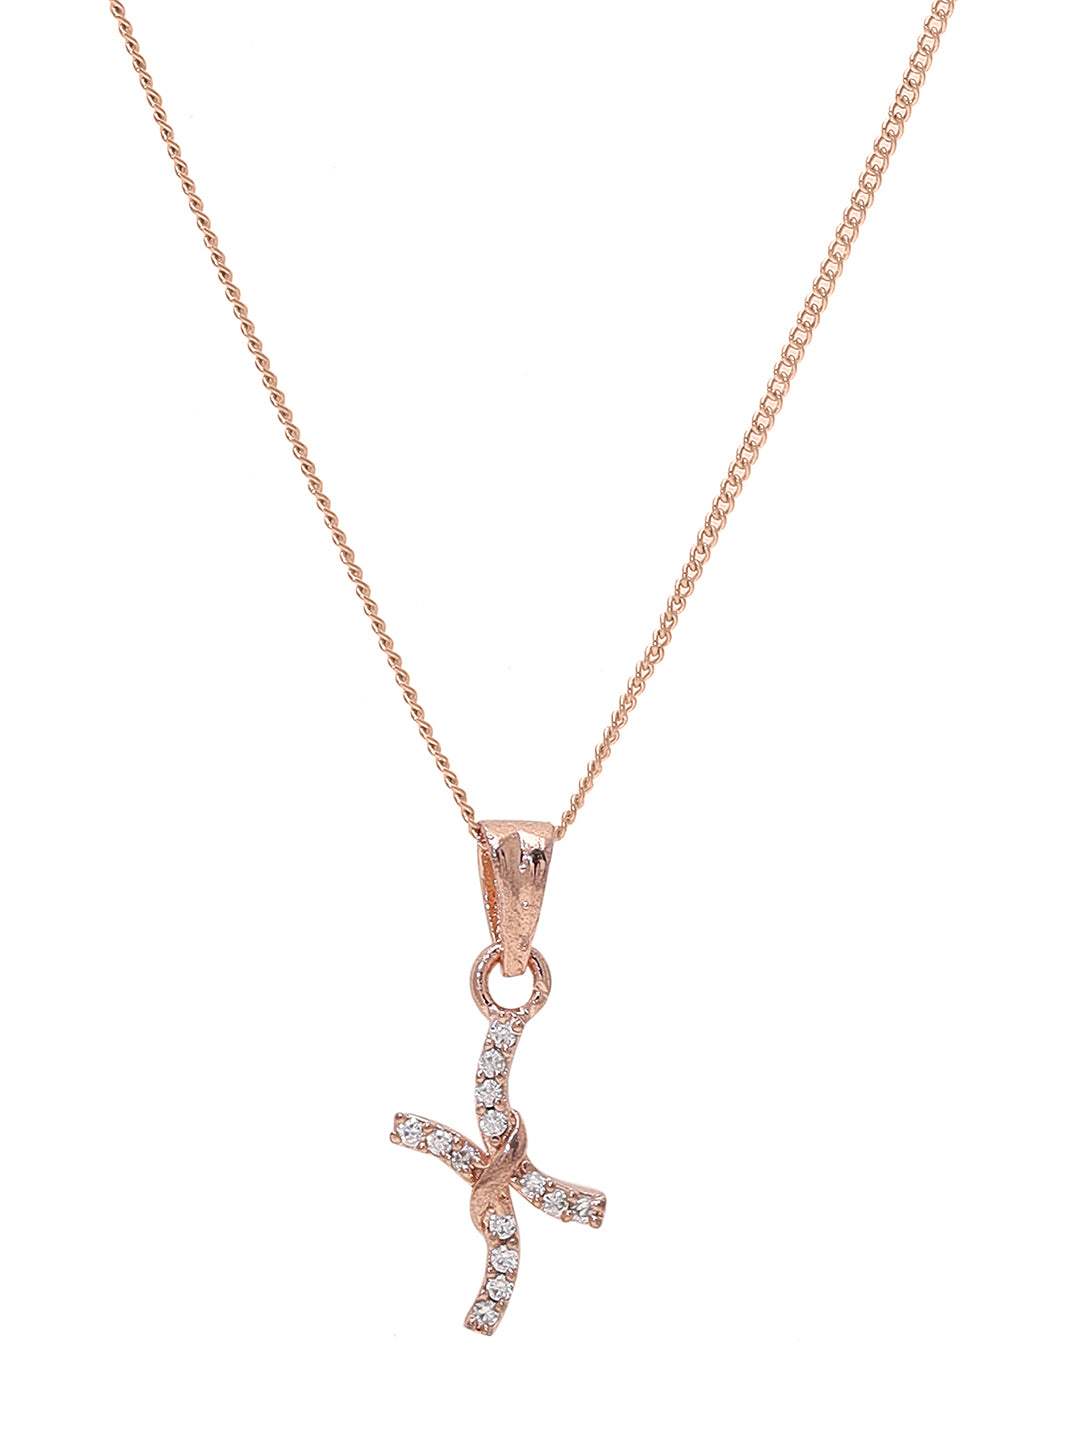 Priyaasi A Rose-Gold Plated Symphony Necklace with Enchanting Pendant